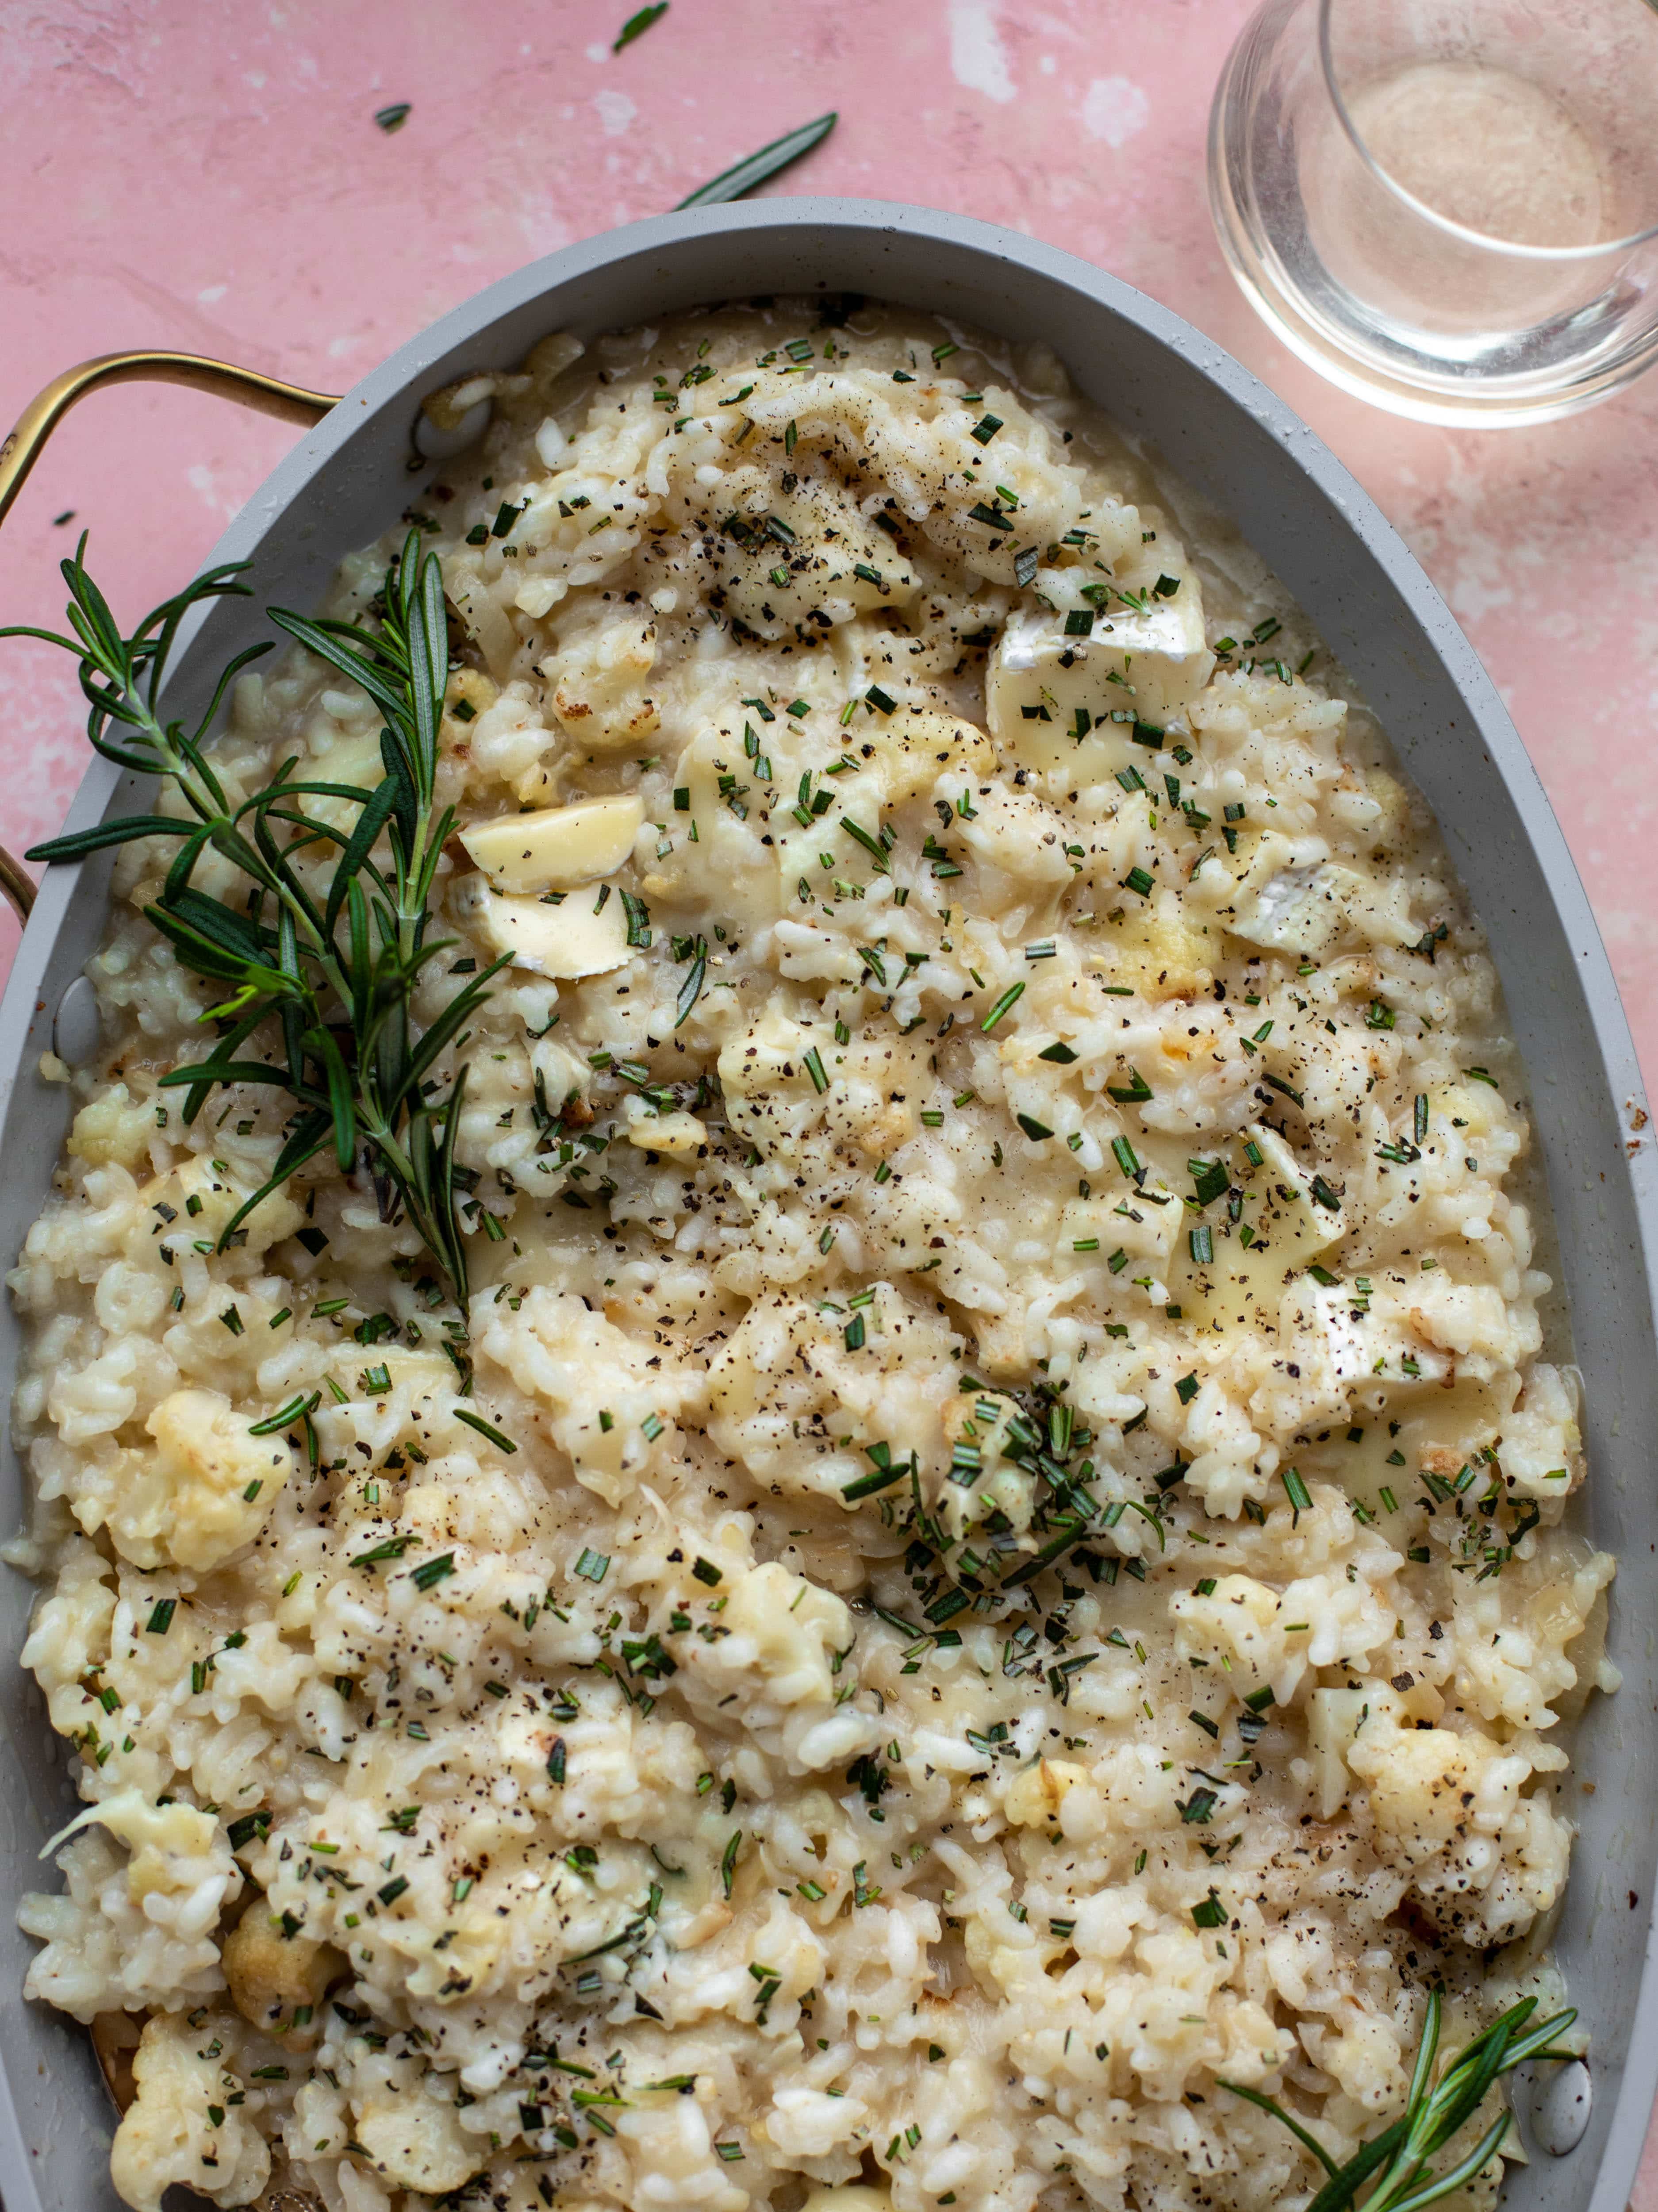 This baked risotto is delicious and so much easier than the stovetop version! Toasted cauliflower, brie cheese and rosemary make this taste incredible.